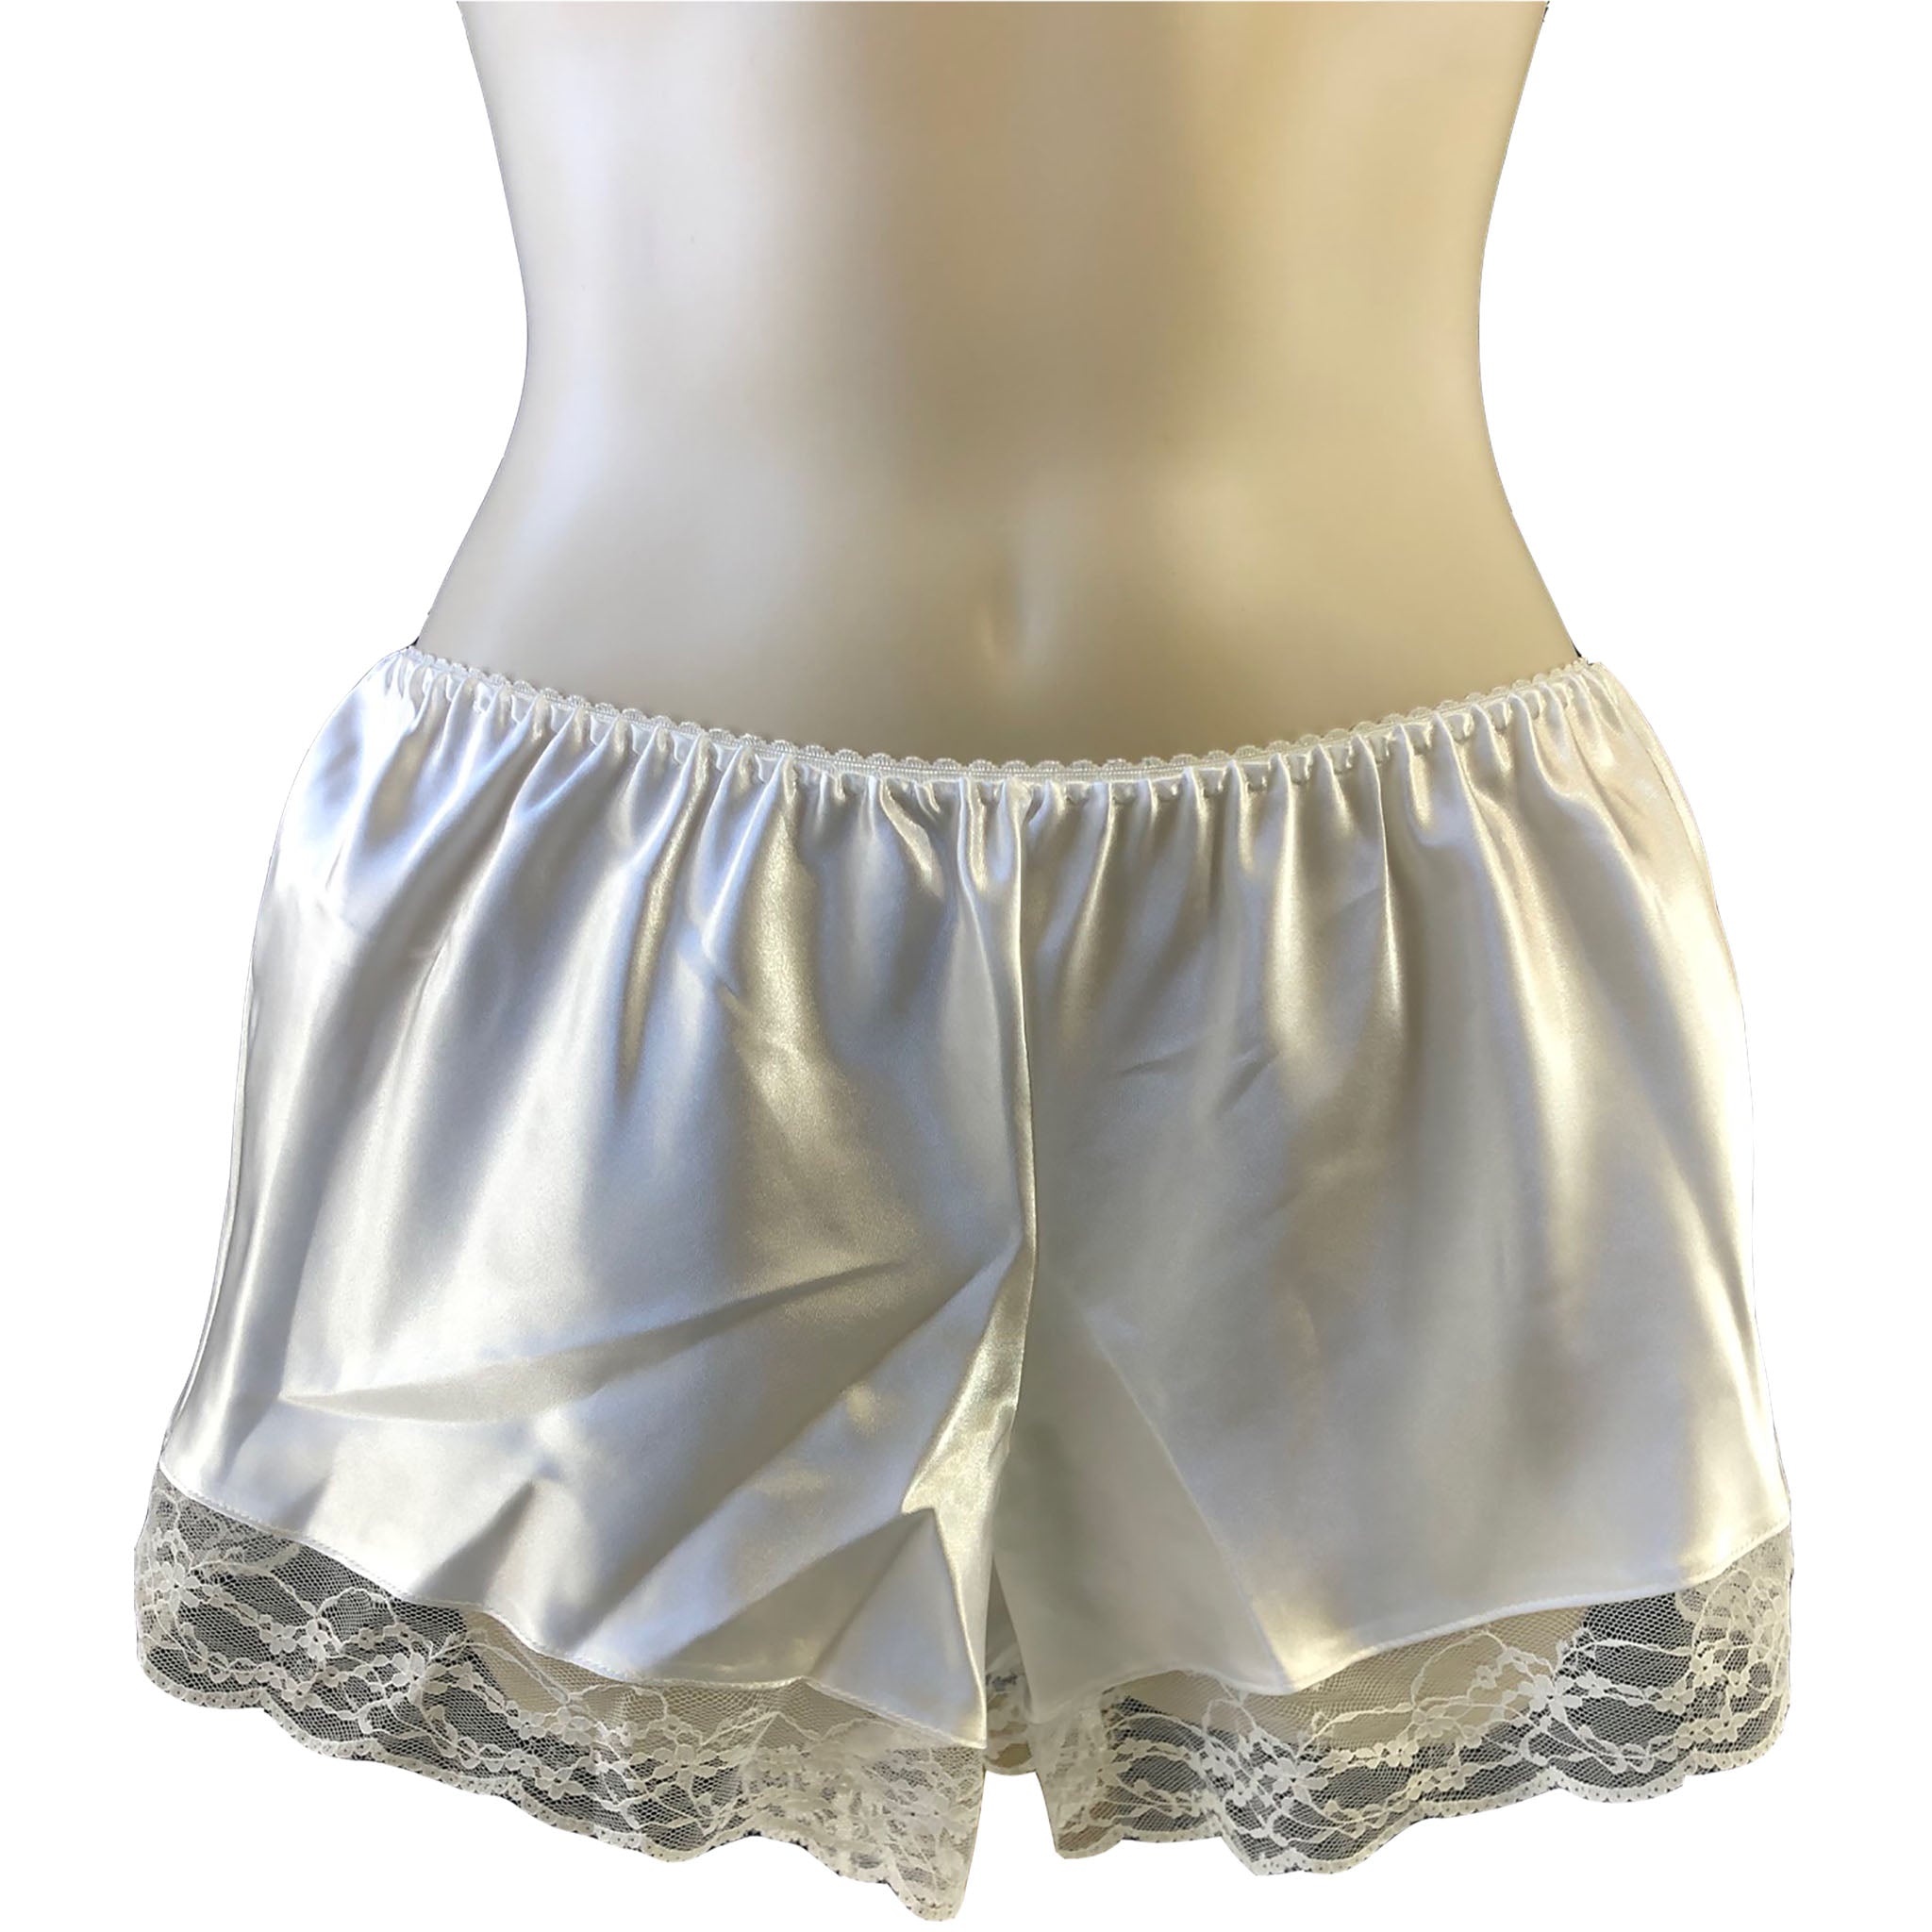 Ivory White Sexy Satin Lace French Knickers Negligee Lingerie PLUS